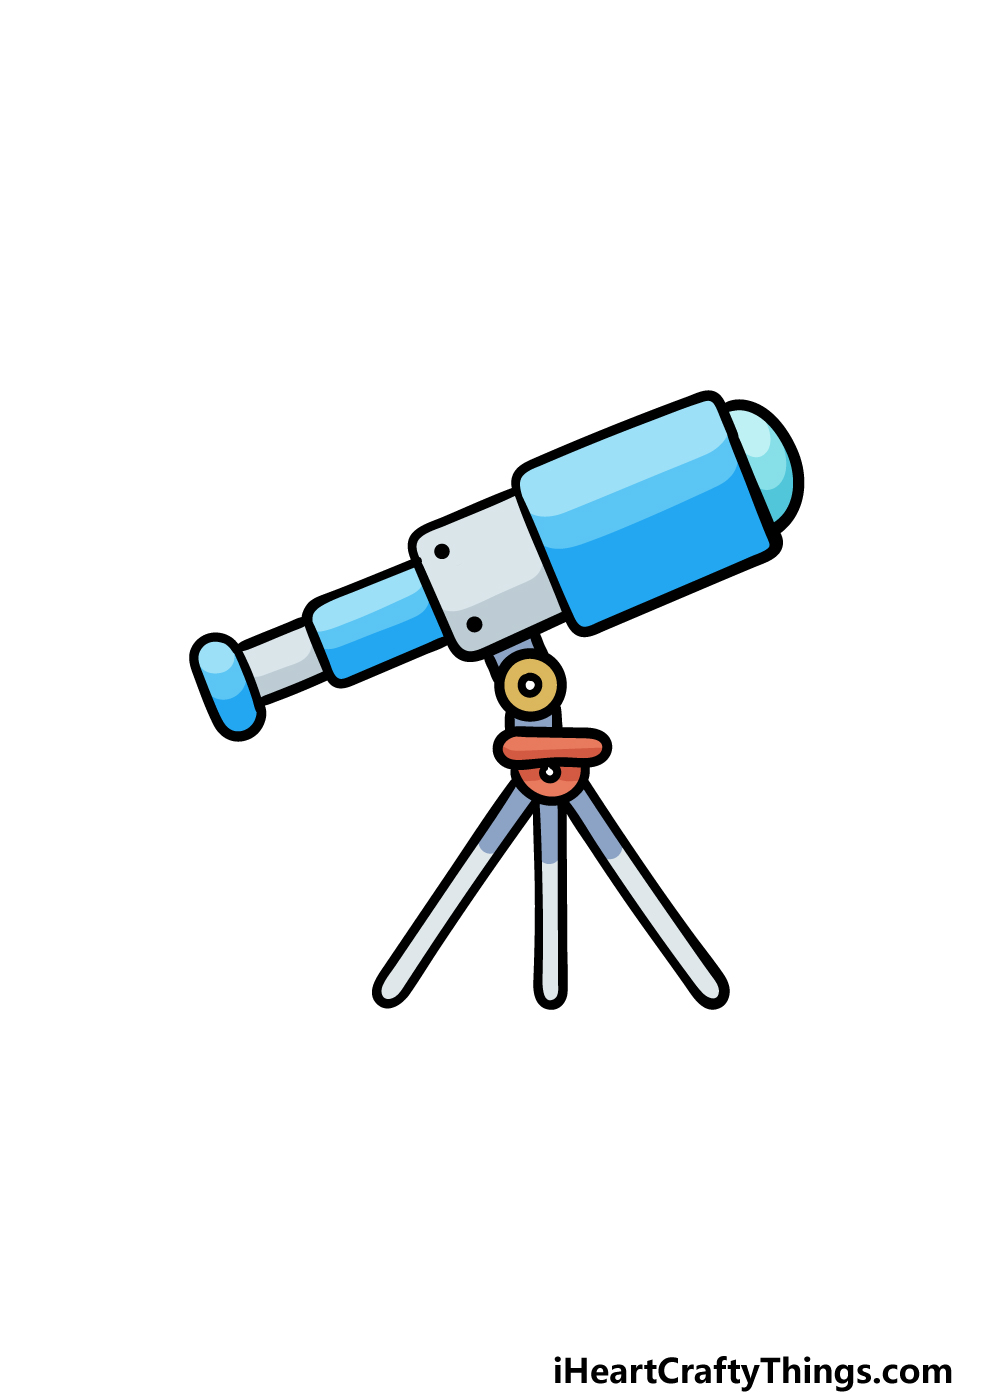 Telescope Drawing - How To Draw A Telescope Step By Step